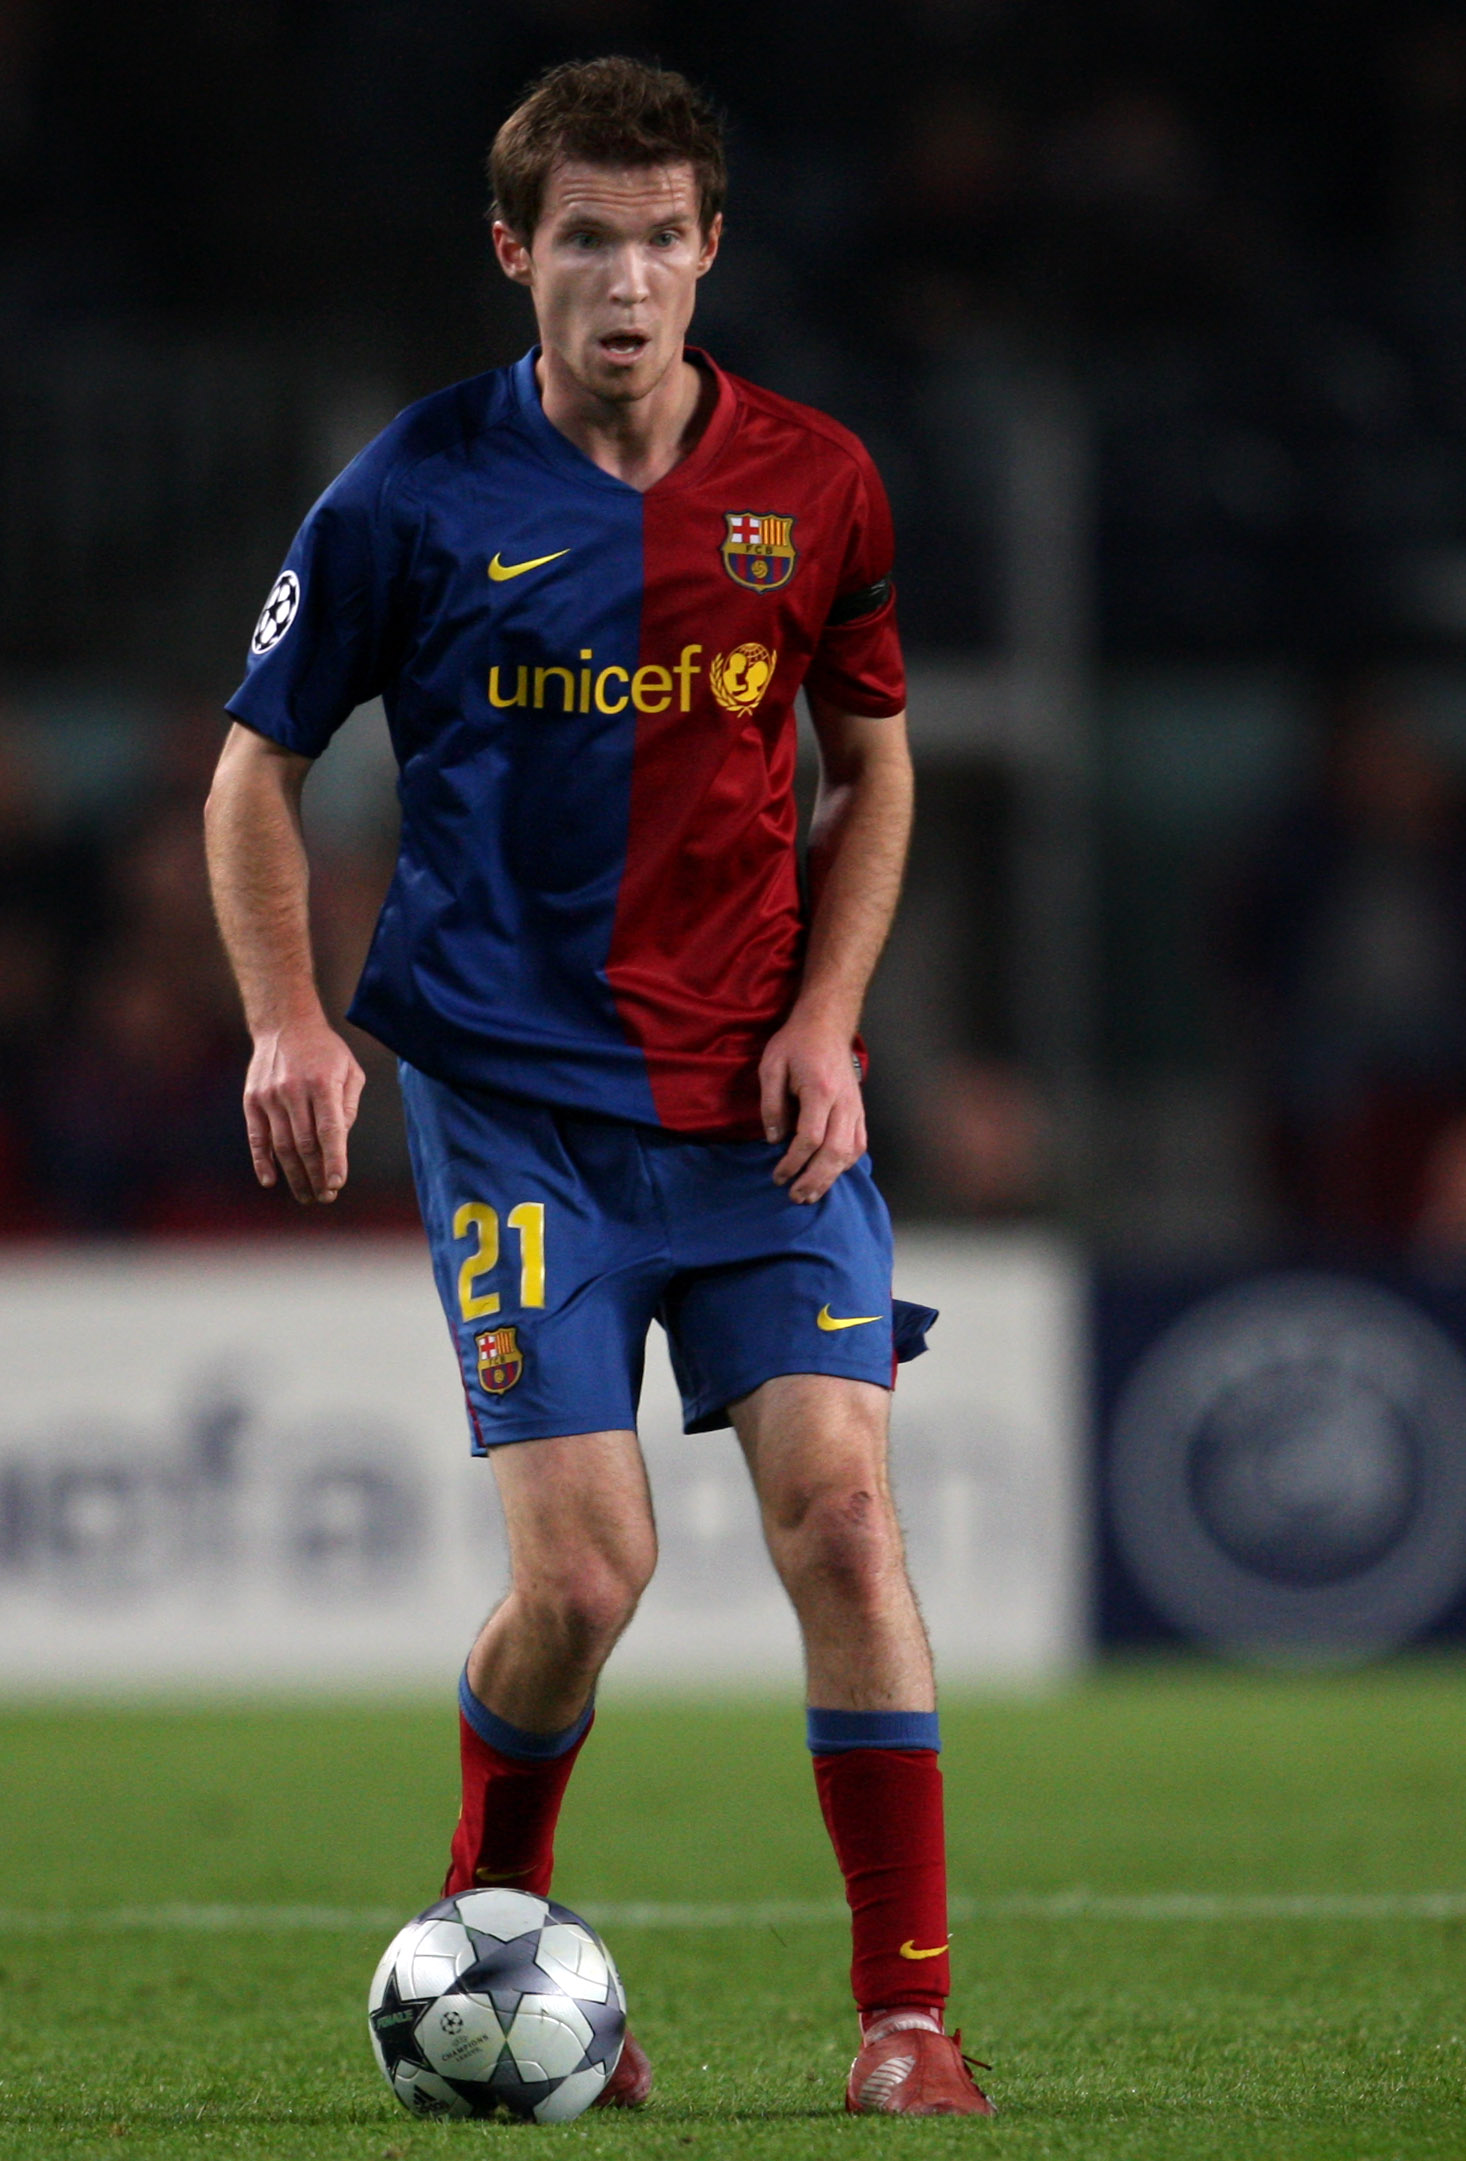 BARCELONA, SPAIN - NOVEMBER 04:  Aleksandr Hleb of Barcelona with the ball at his feet during the UEFA Champions League Group C match between Barcelona and Basel at the Camp Nou stadium on November 4, 2008 in Barcelona, Spain. The match ended in a 1-1 dra